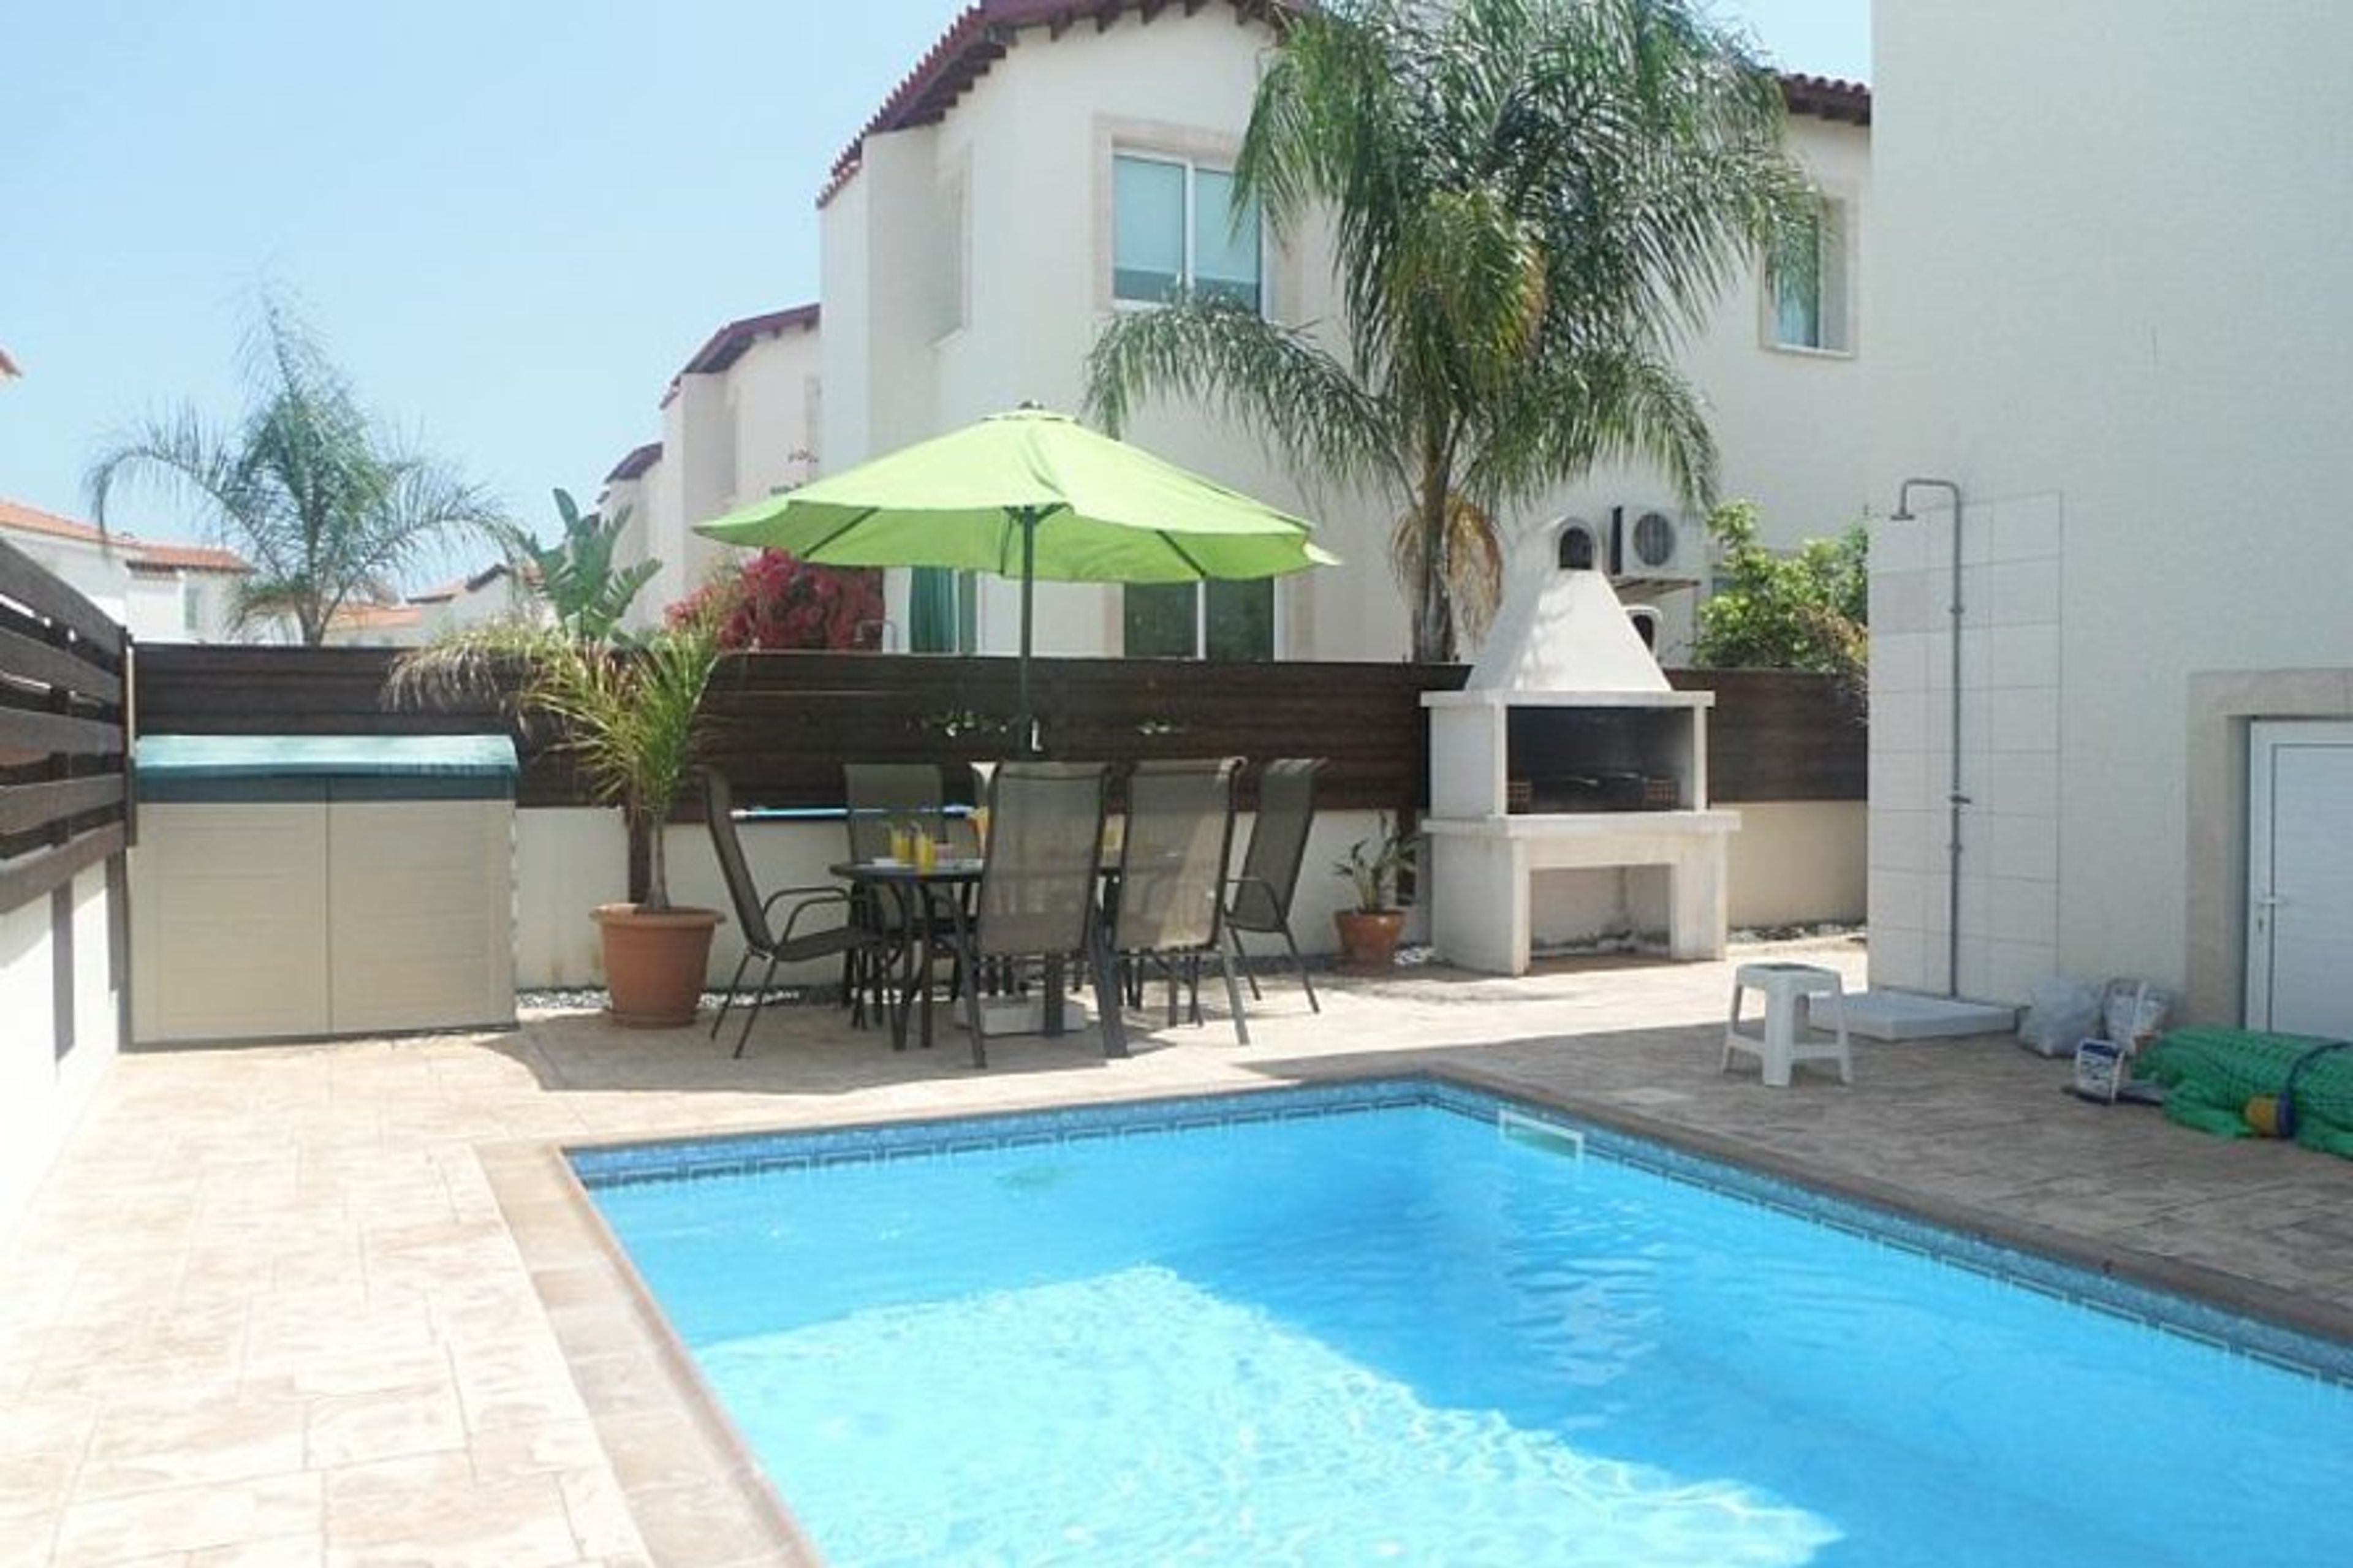 Beautiful spacious area with private pool and sun bathing all day long